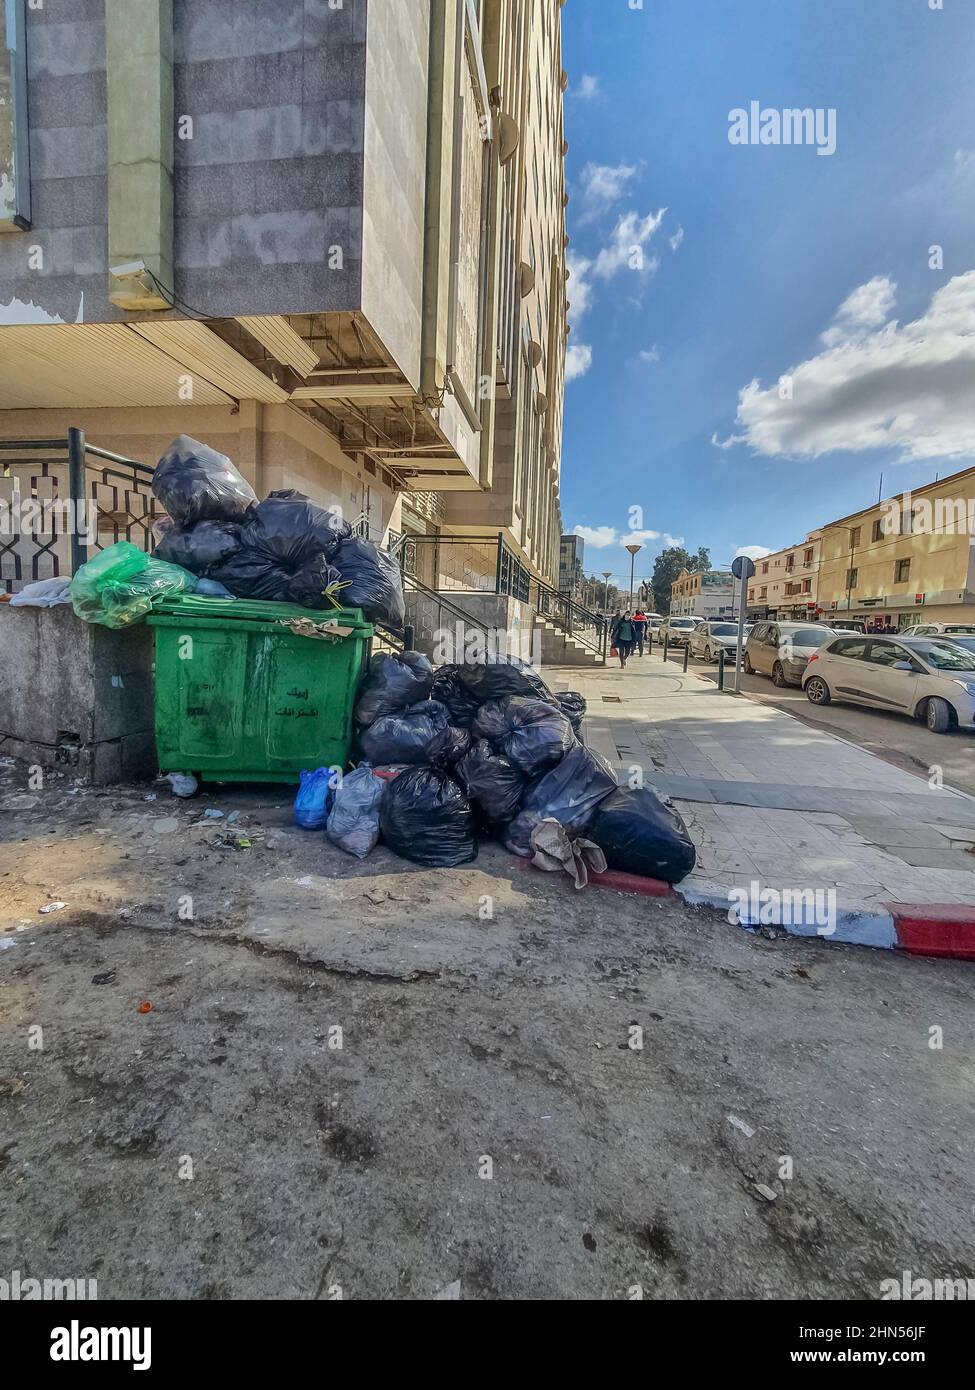 Full garbage bin in the street on the sidewalk near the ElQods centre in Cheraga, Algiers. People walking and cas parked Stock Photo